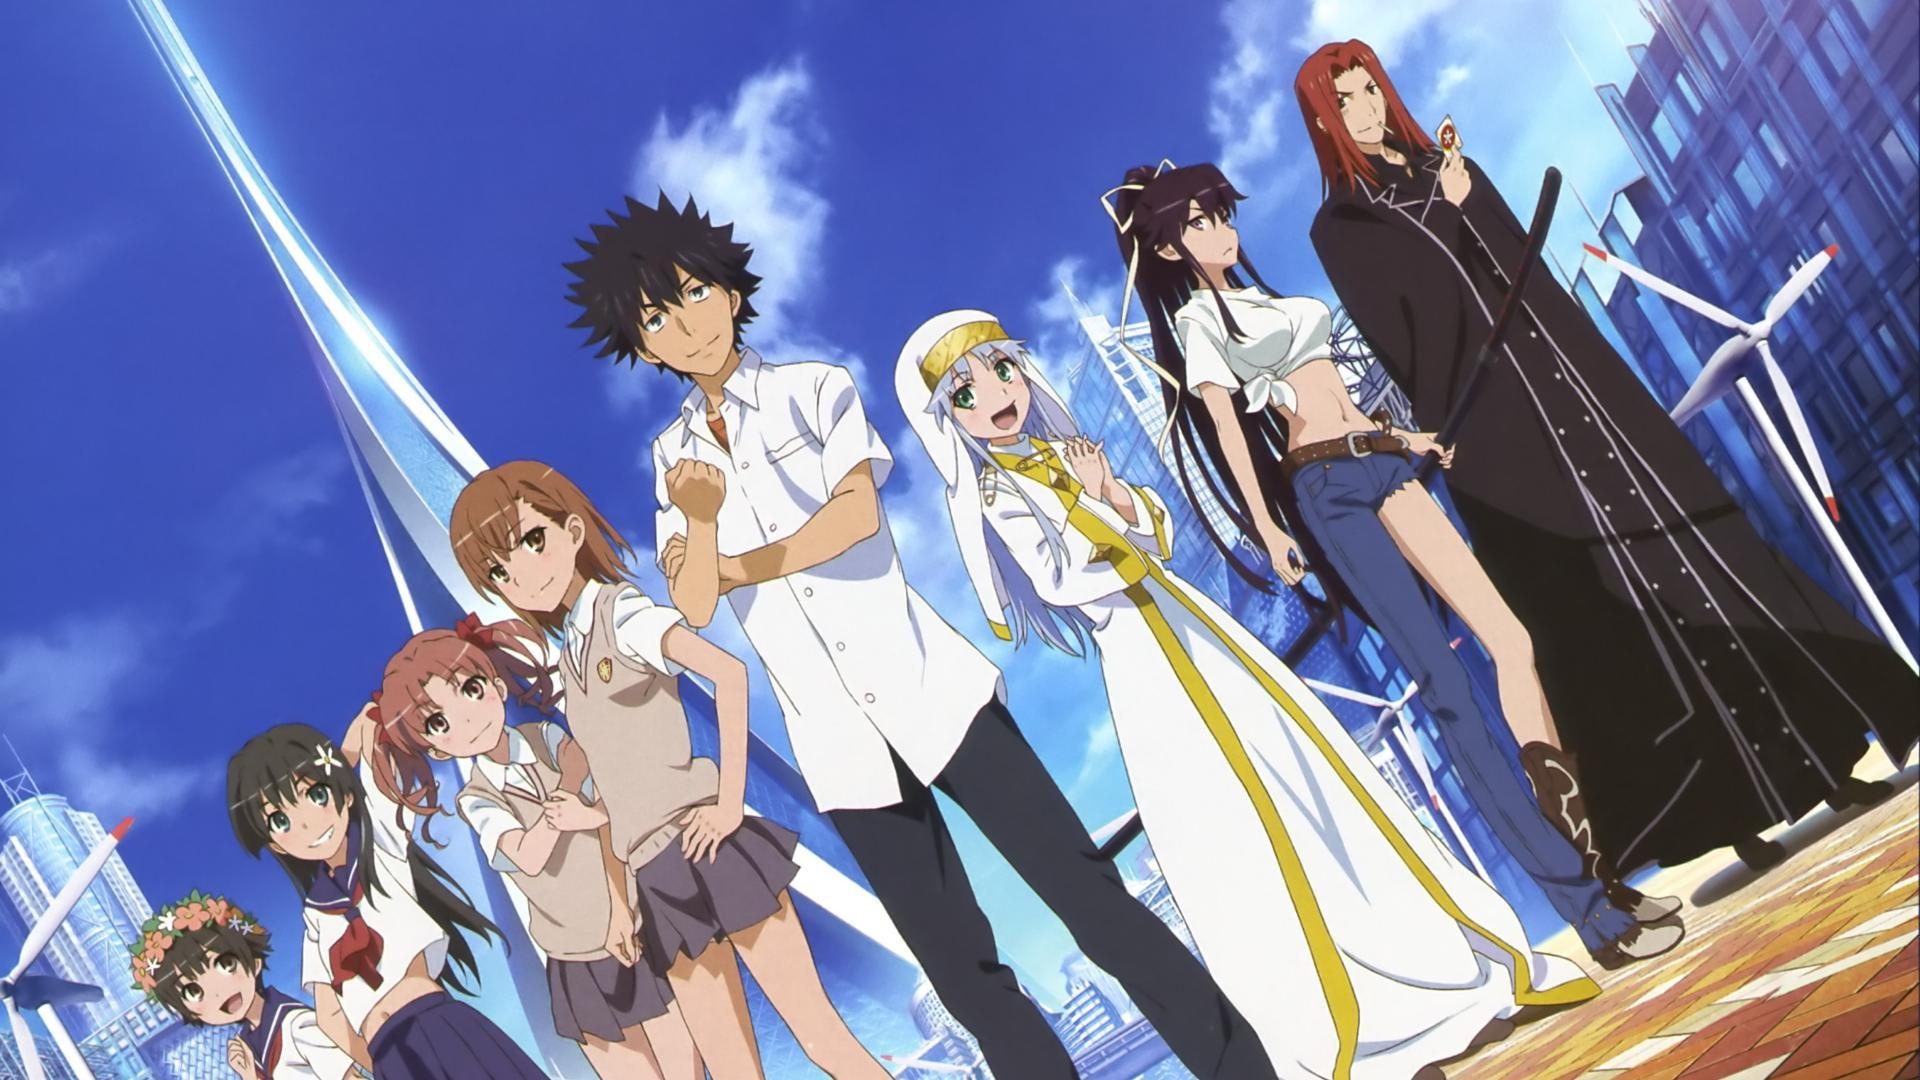 A Certain Magical Index, Anime wallpapers, Vivid backgrounds, Magical elements, 1920x1080 Full HD Desktop